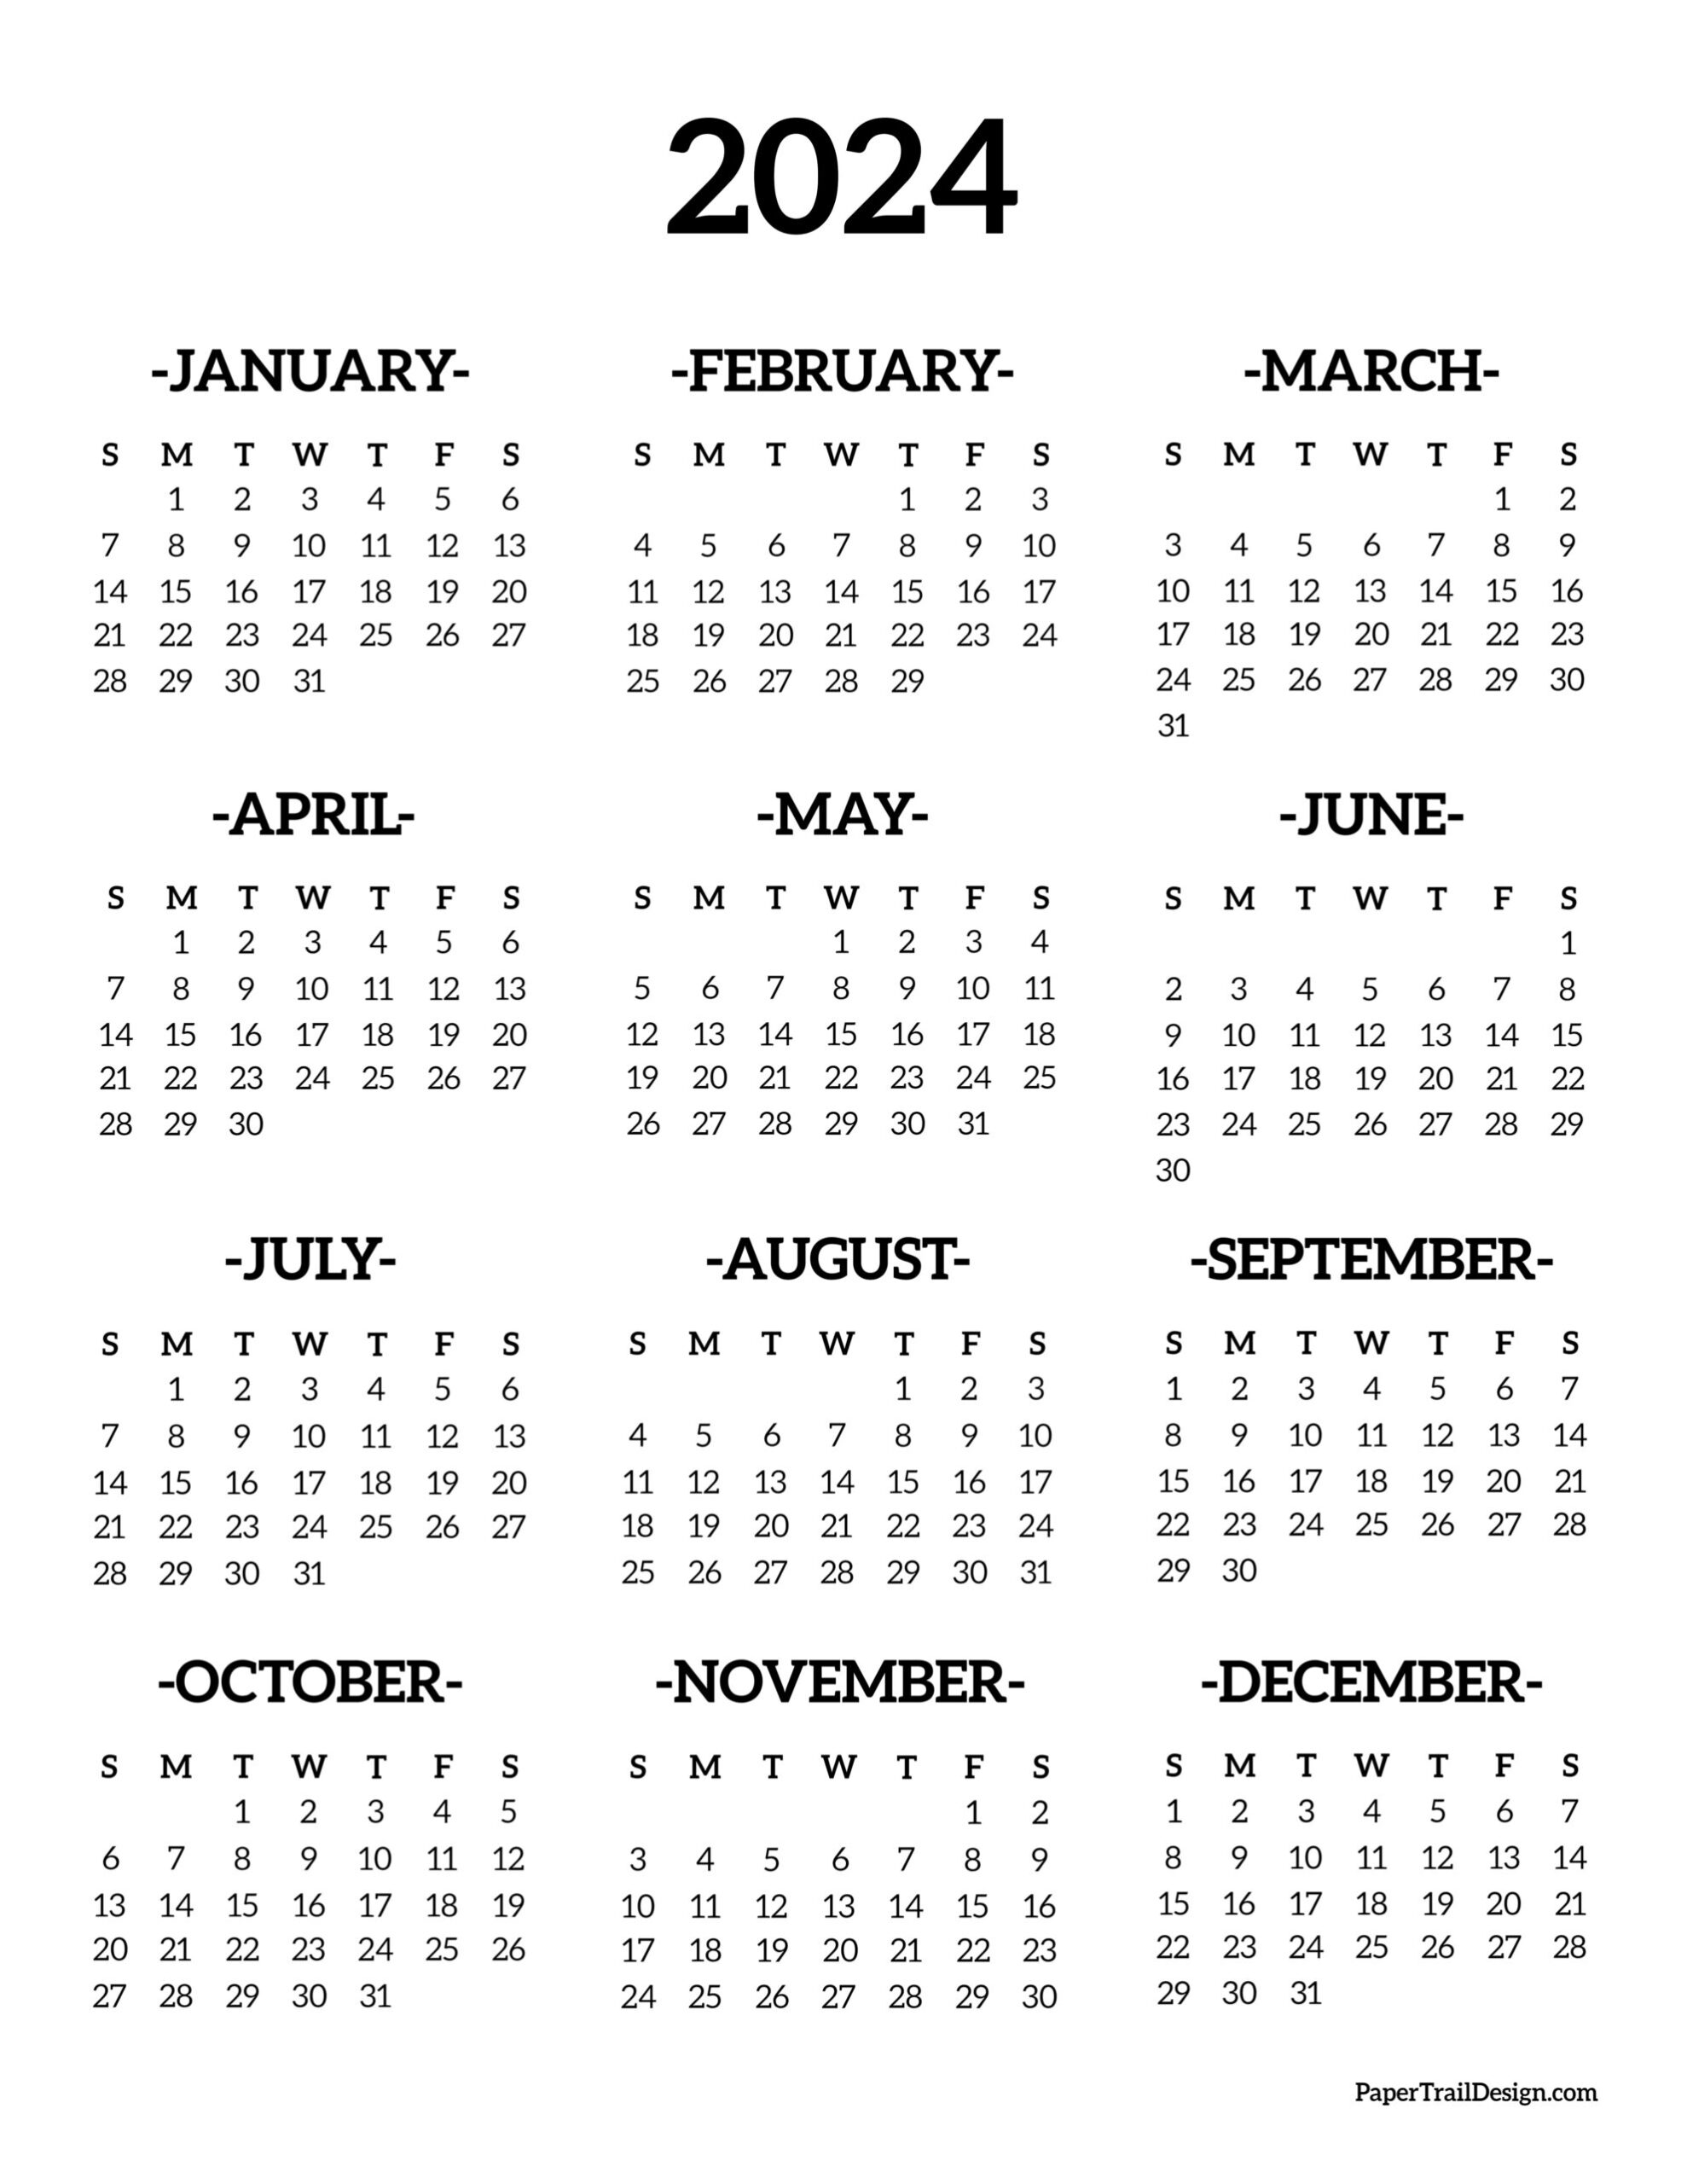 Calendar 2024 Printable One Page - Paper Trail Design for Full Year Calendar 2024 Printable